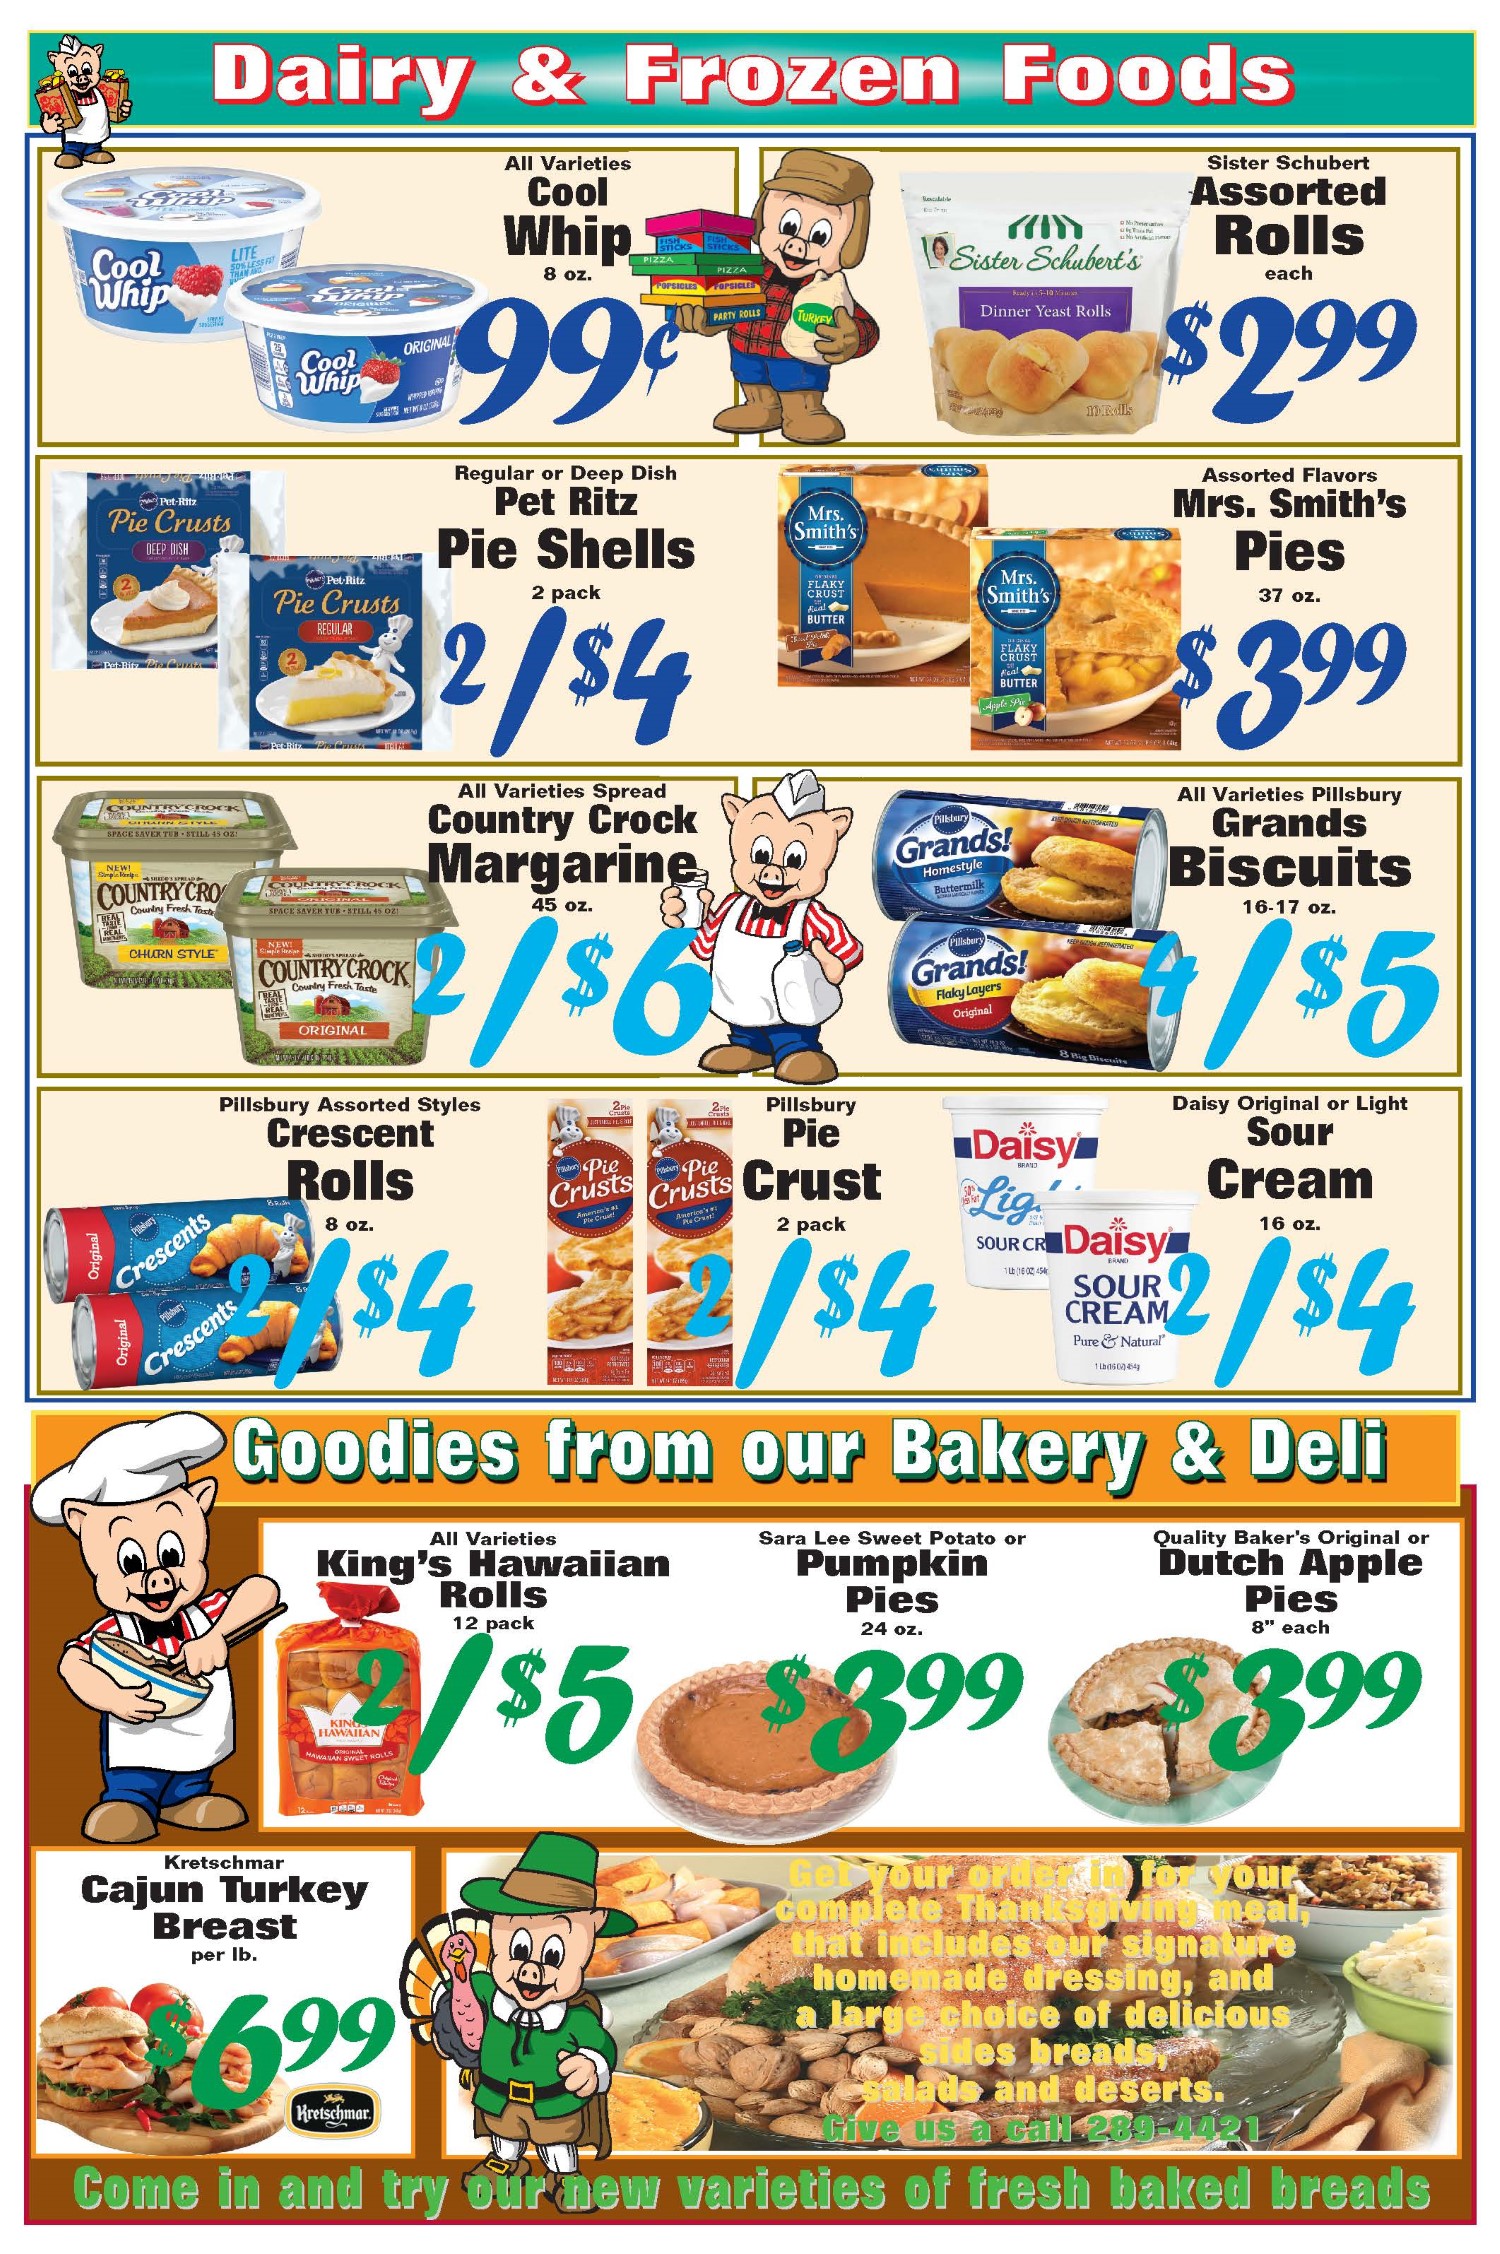 piggly wiggly hartford wi weekly ad